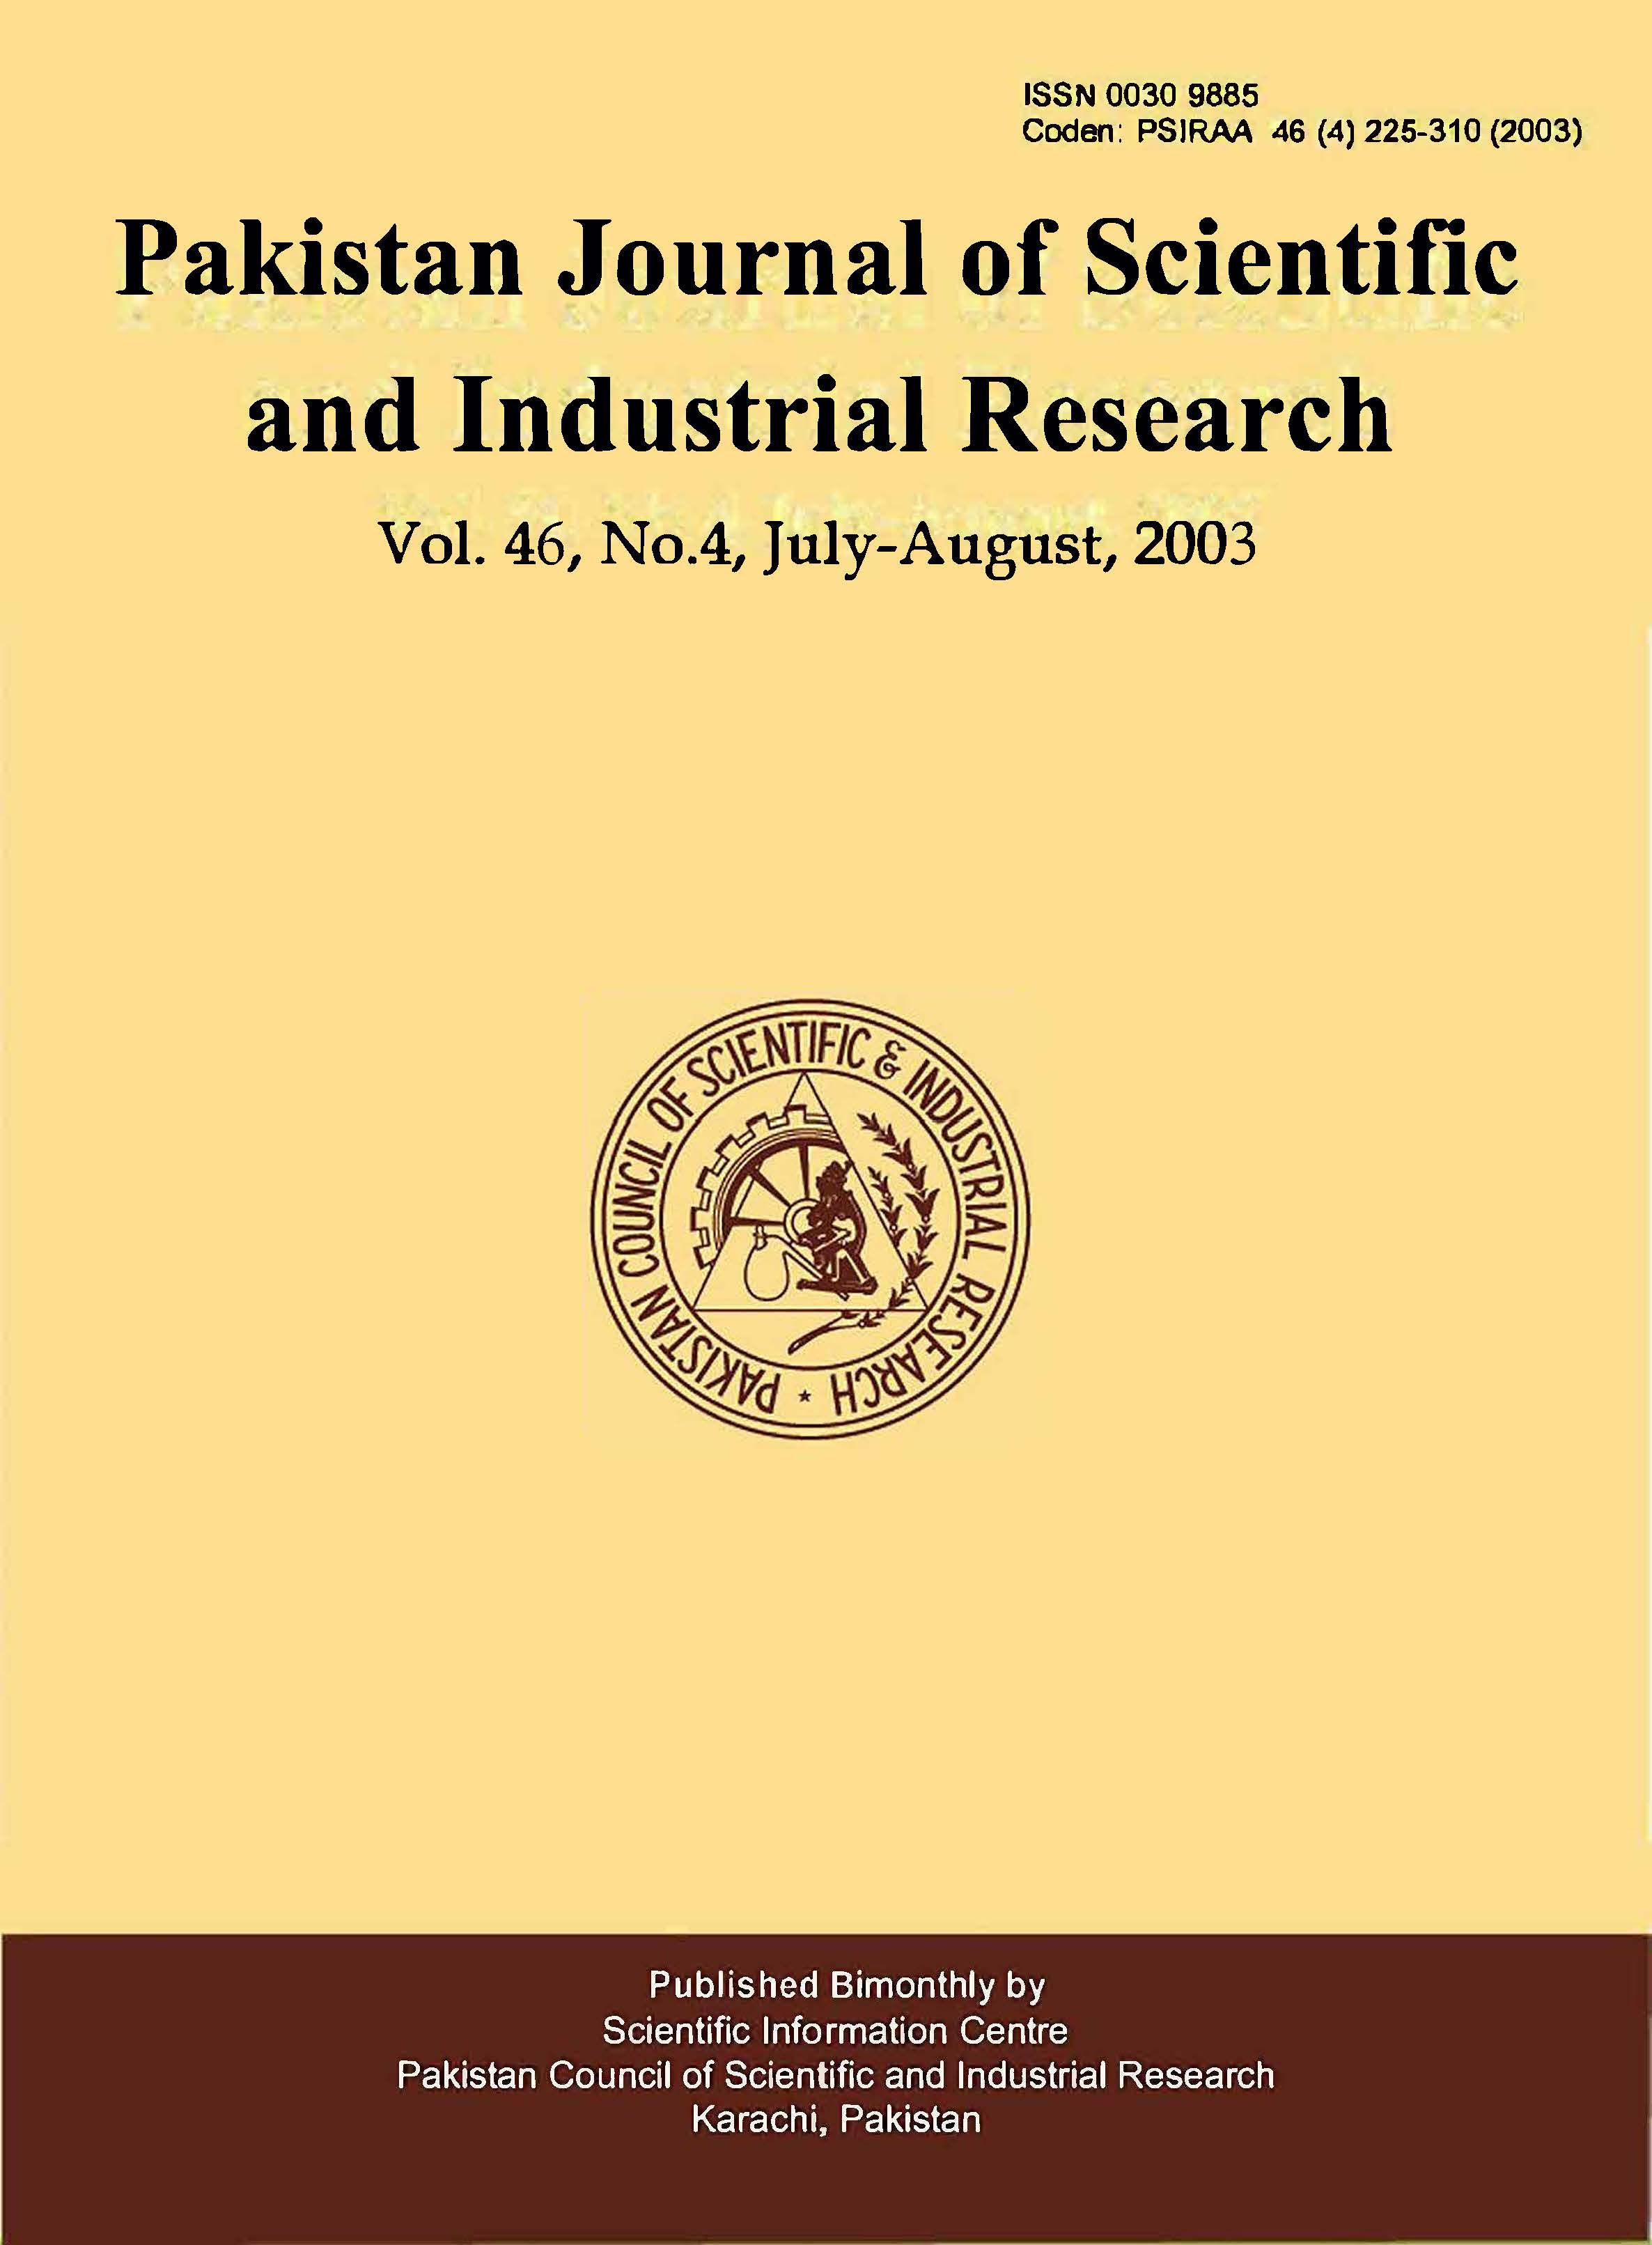 					View Vol. 46 No. 4 (2003): Pakistan Journal of Scientific and Industrial Research
				